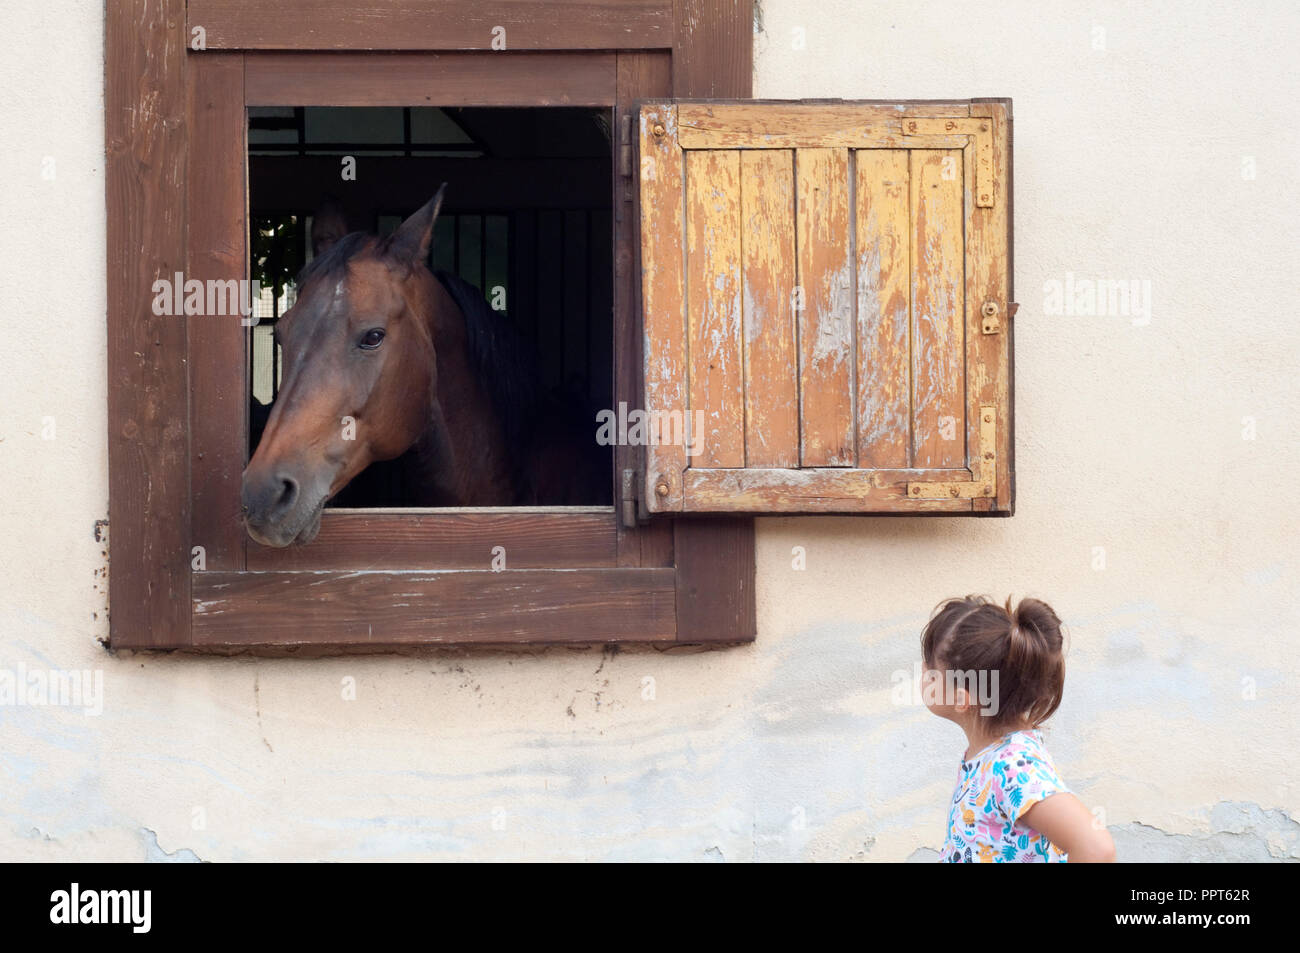 Girl Looking at Horse Banque D'Images